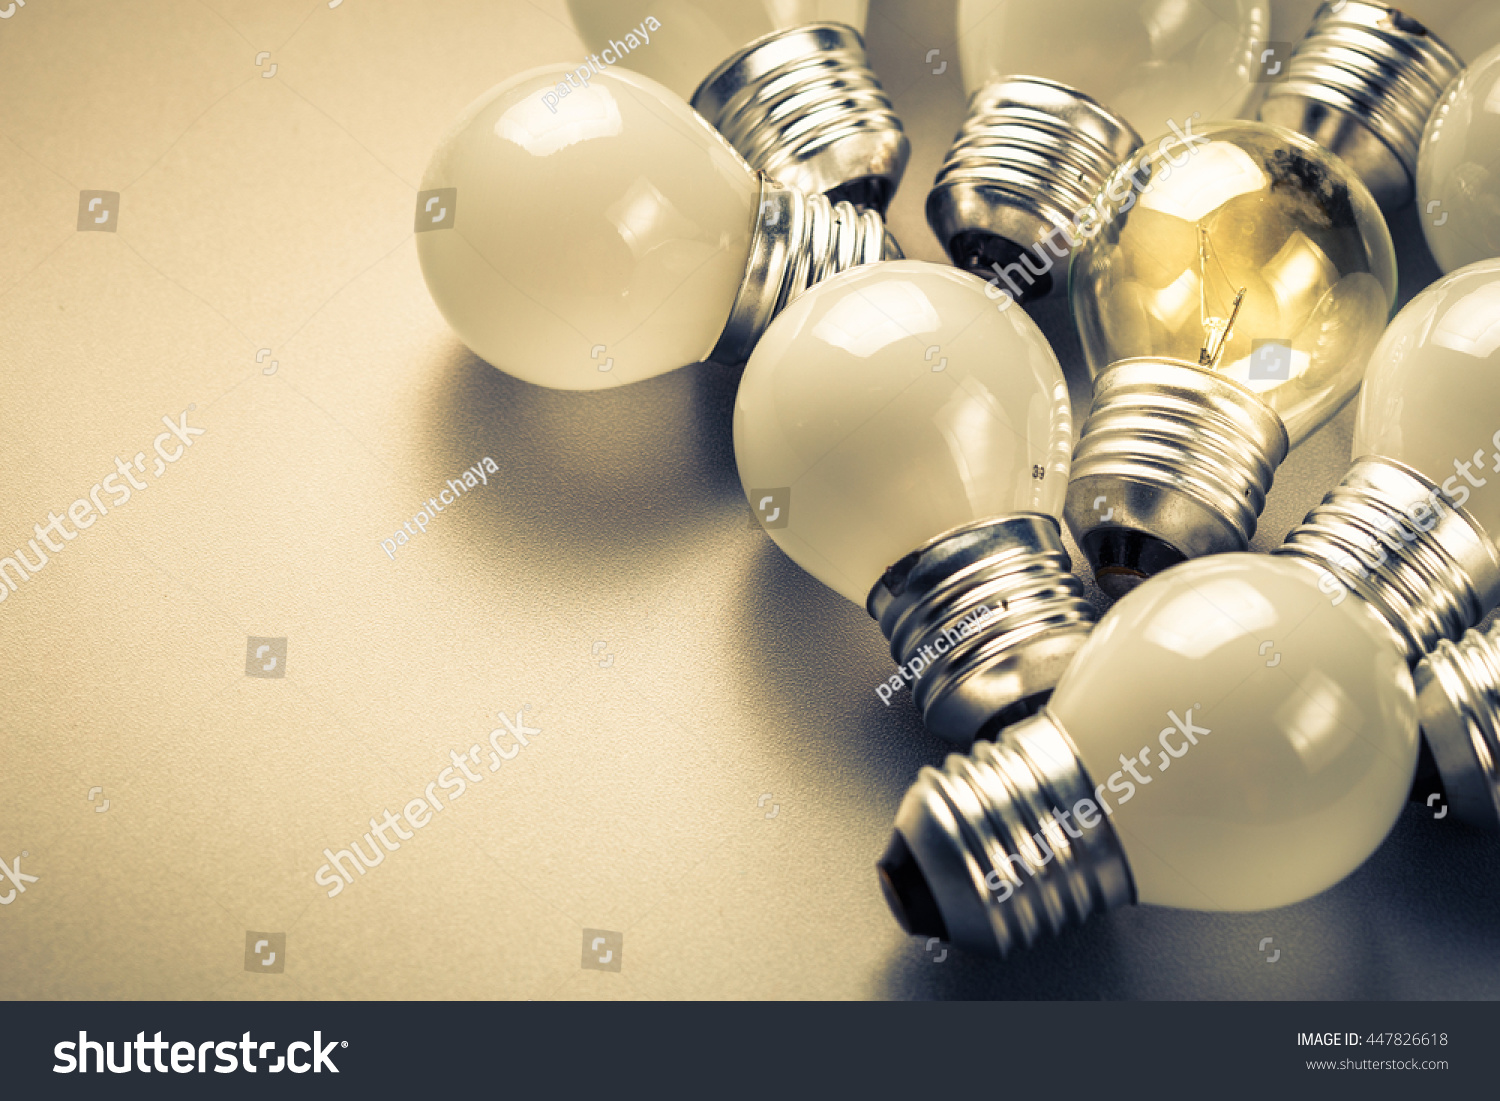 Small light bulbs and the different one glowing in the group, small business, original idea concept #447826618